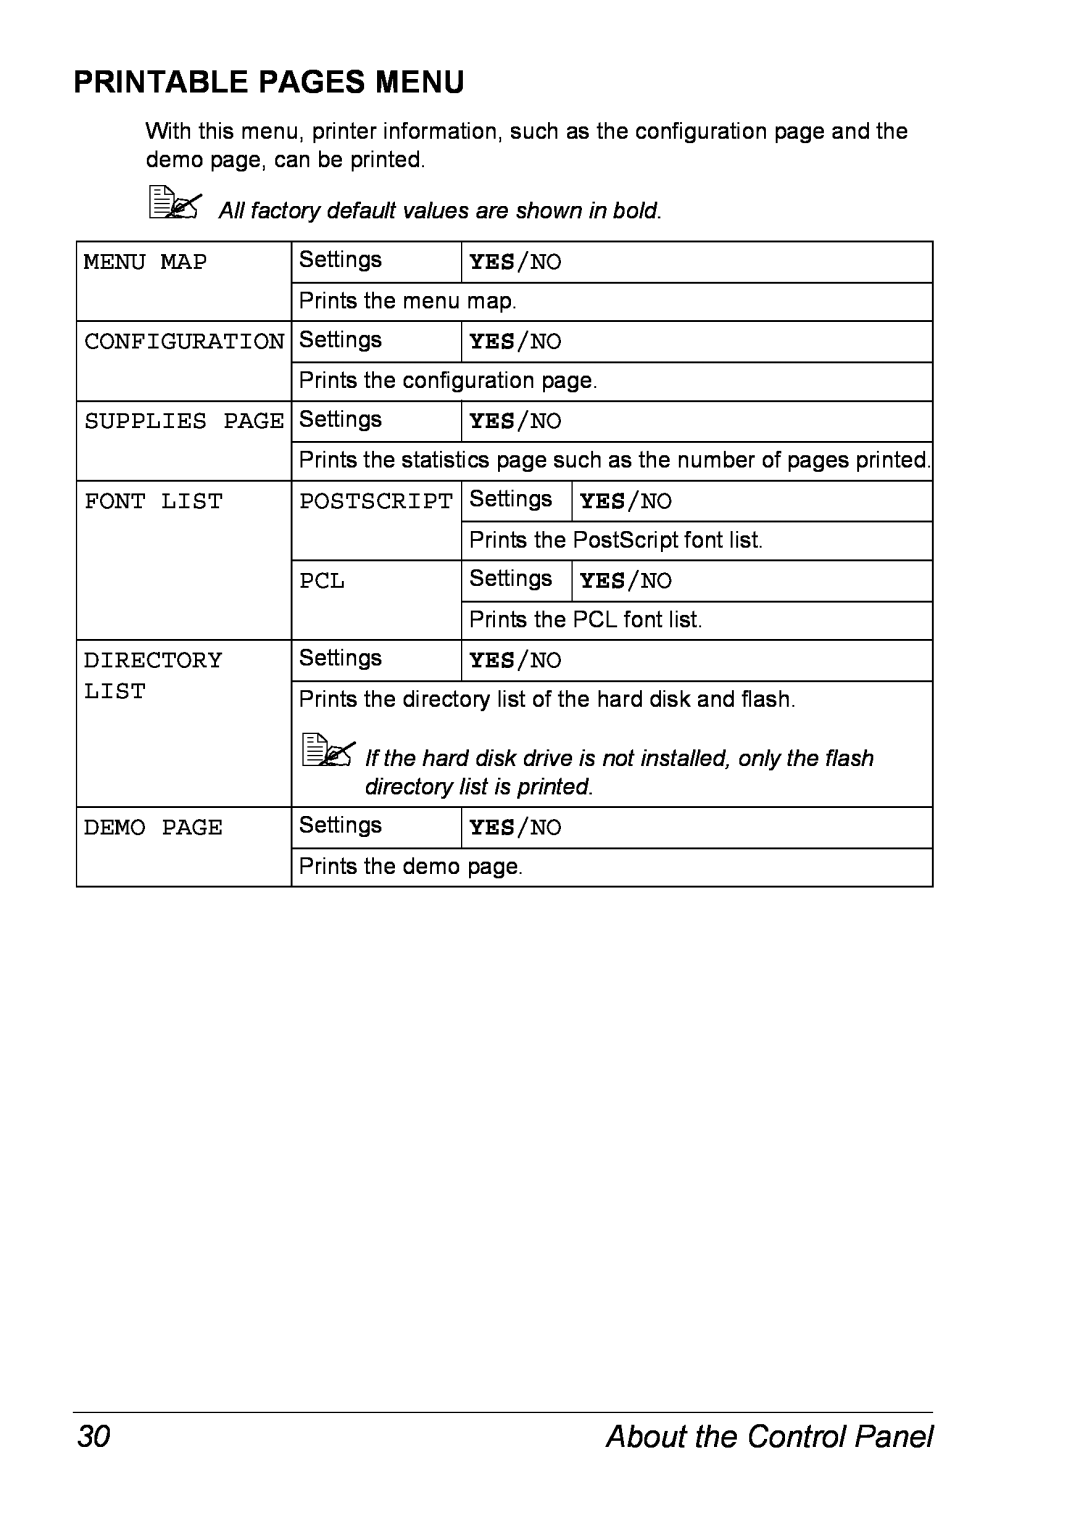 Xerox 6120 manual Printable Pages Menu, Yes /No, About the Control Panel,  All factory default values are shown in bold 